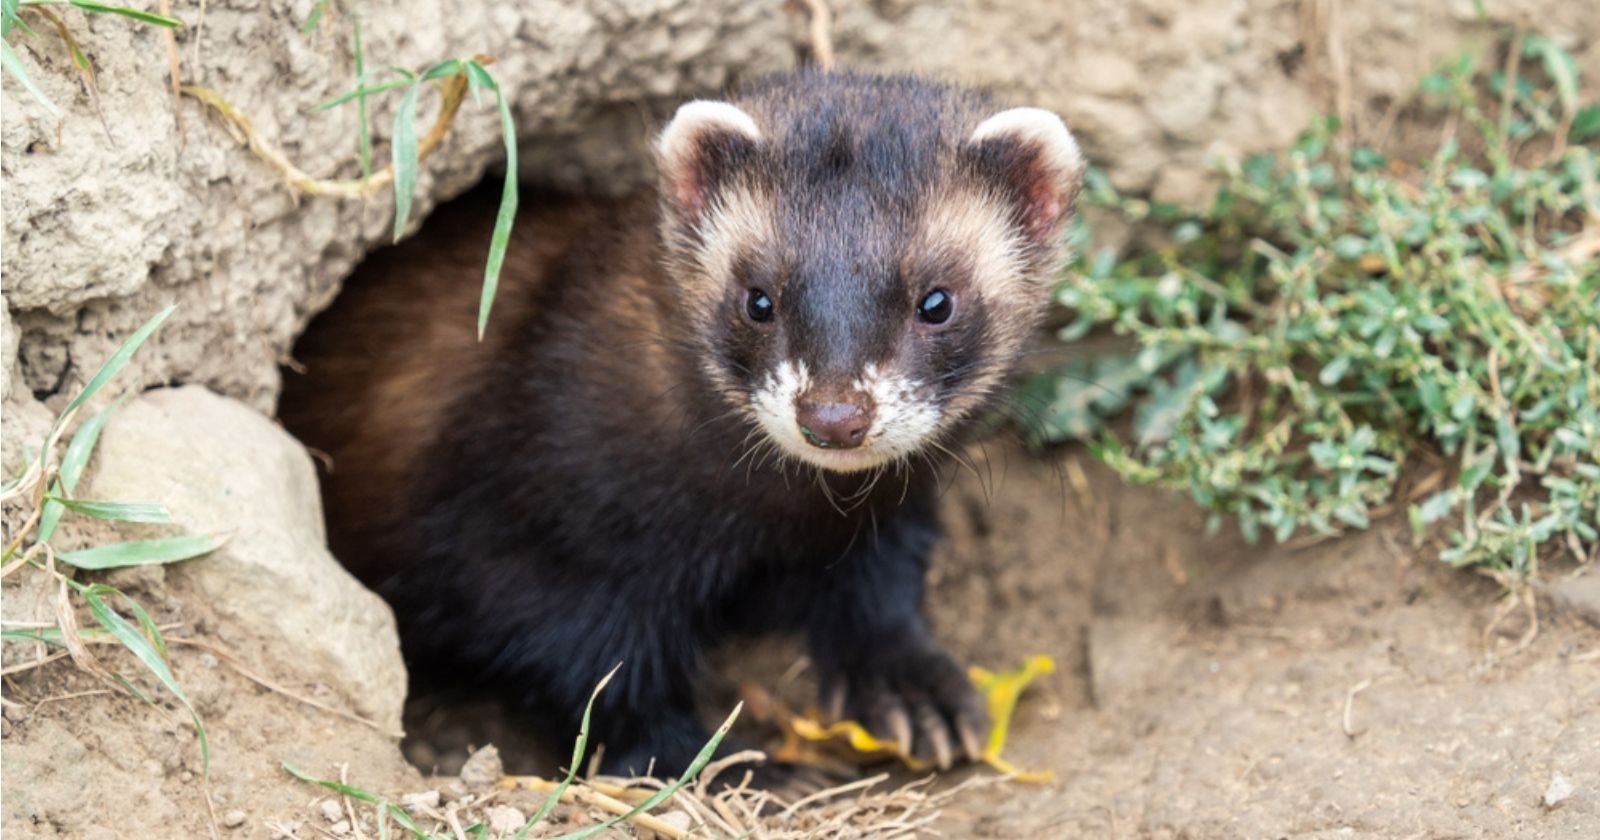 State removes polecat from "pests" list